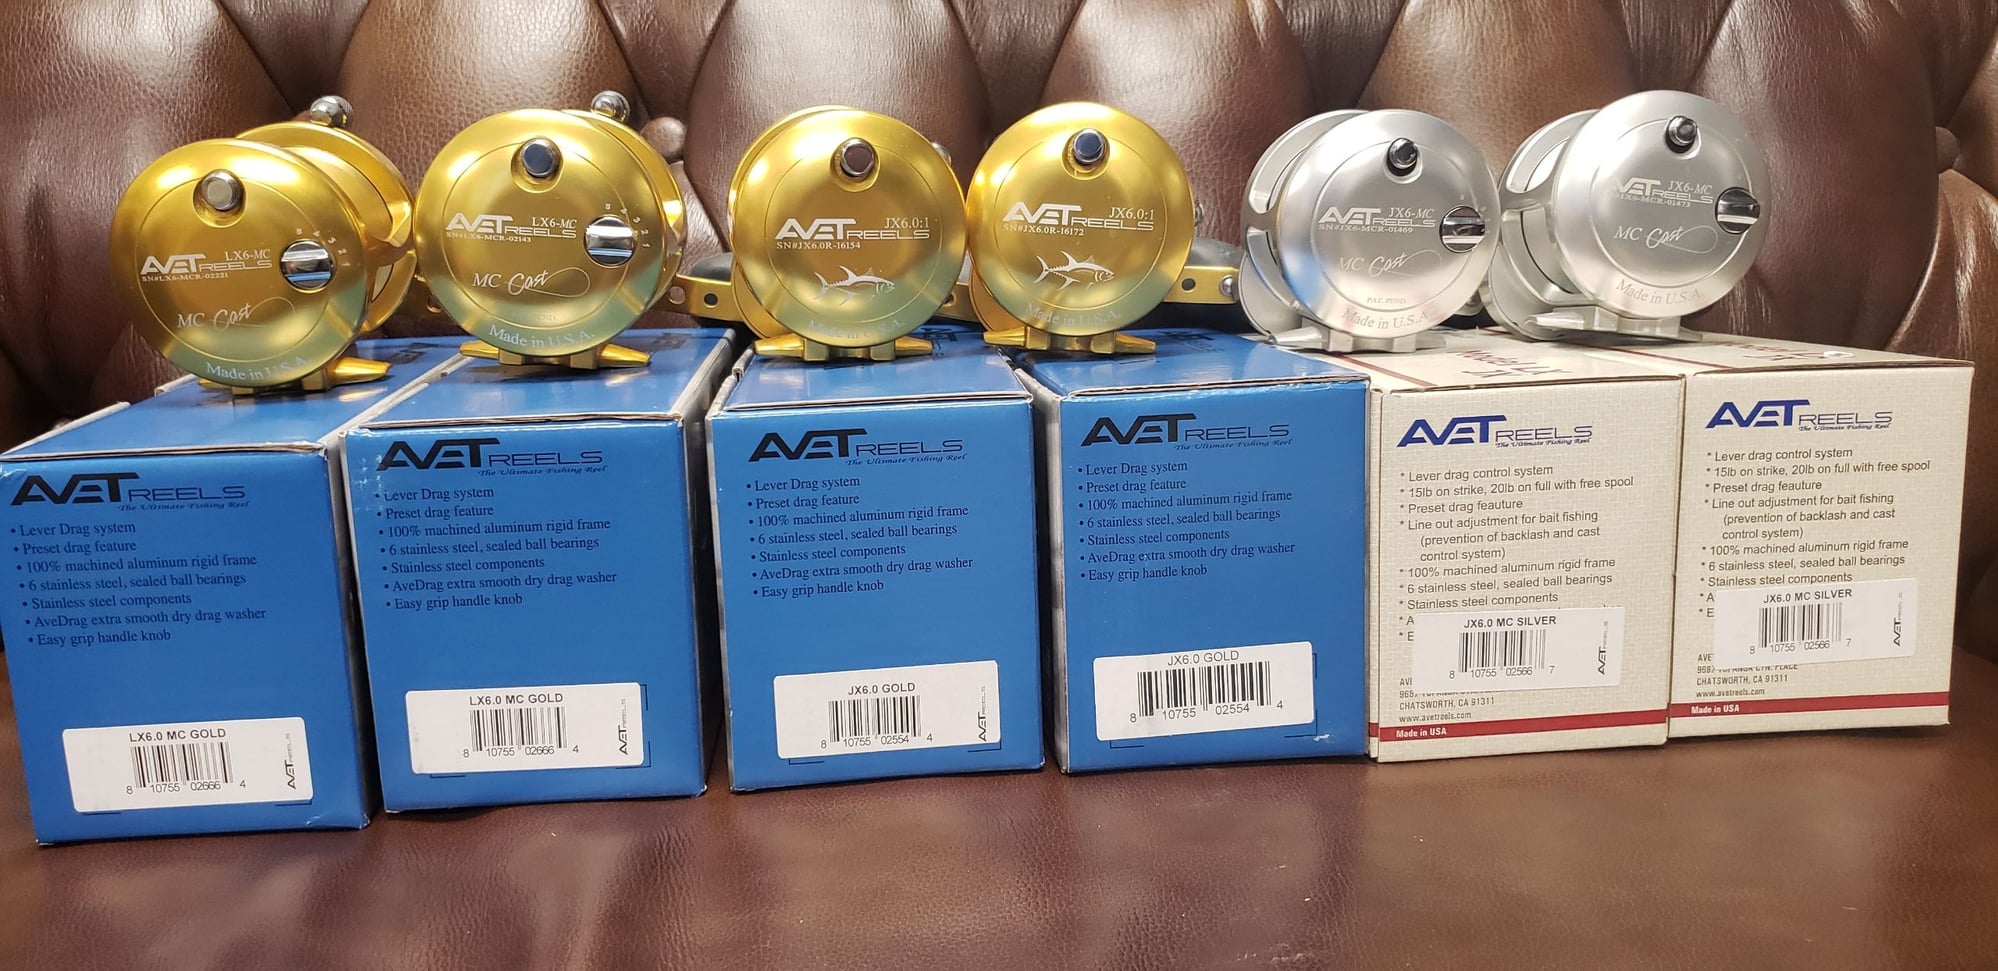 Avet discontinued classic series reels 25% off sale!!!! - The Hull Truth -  Boating and Fishing Forum